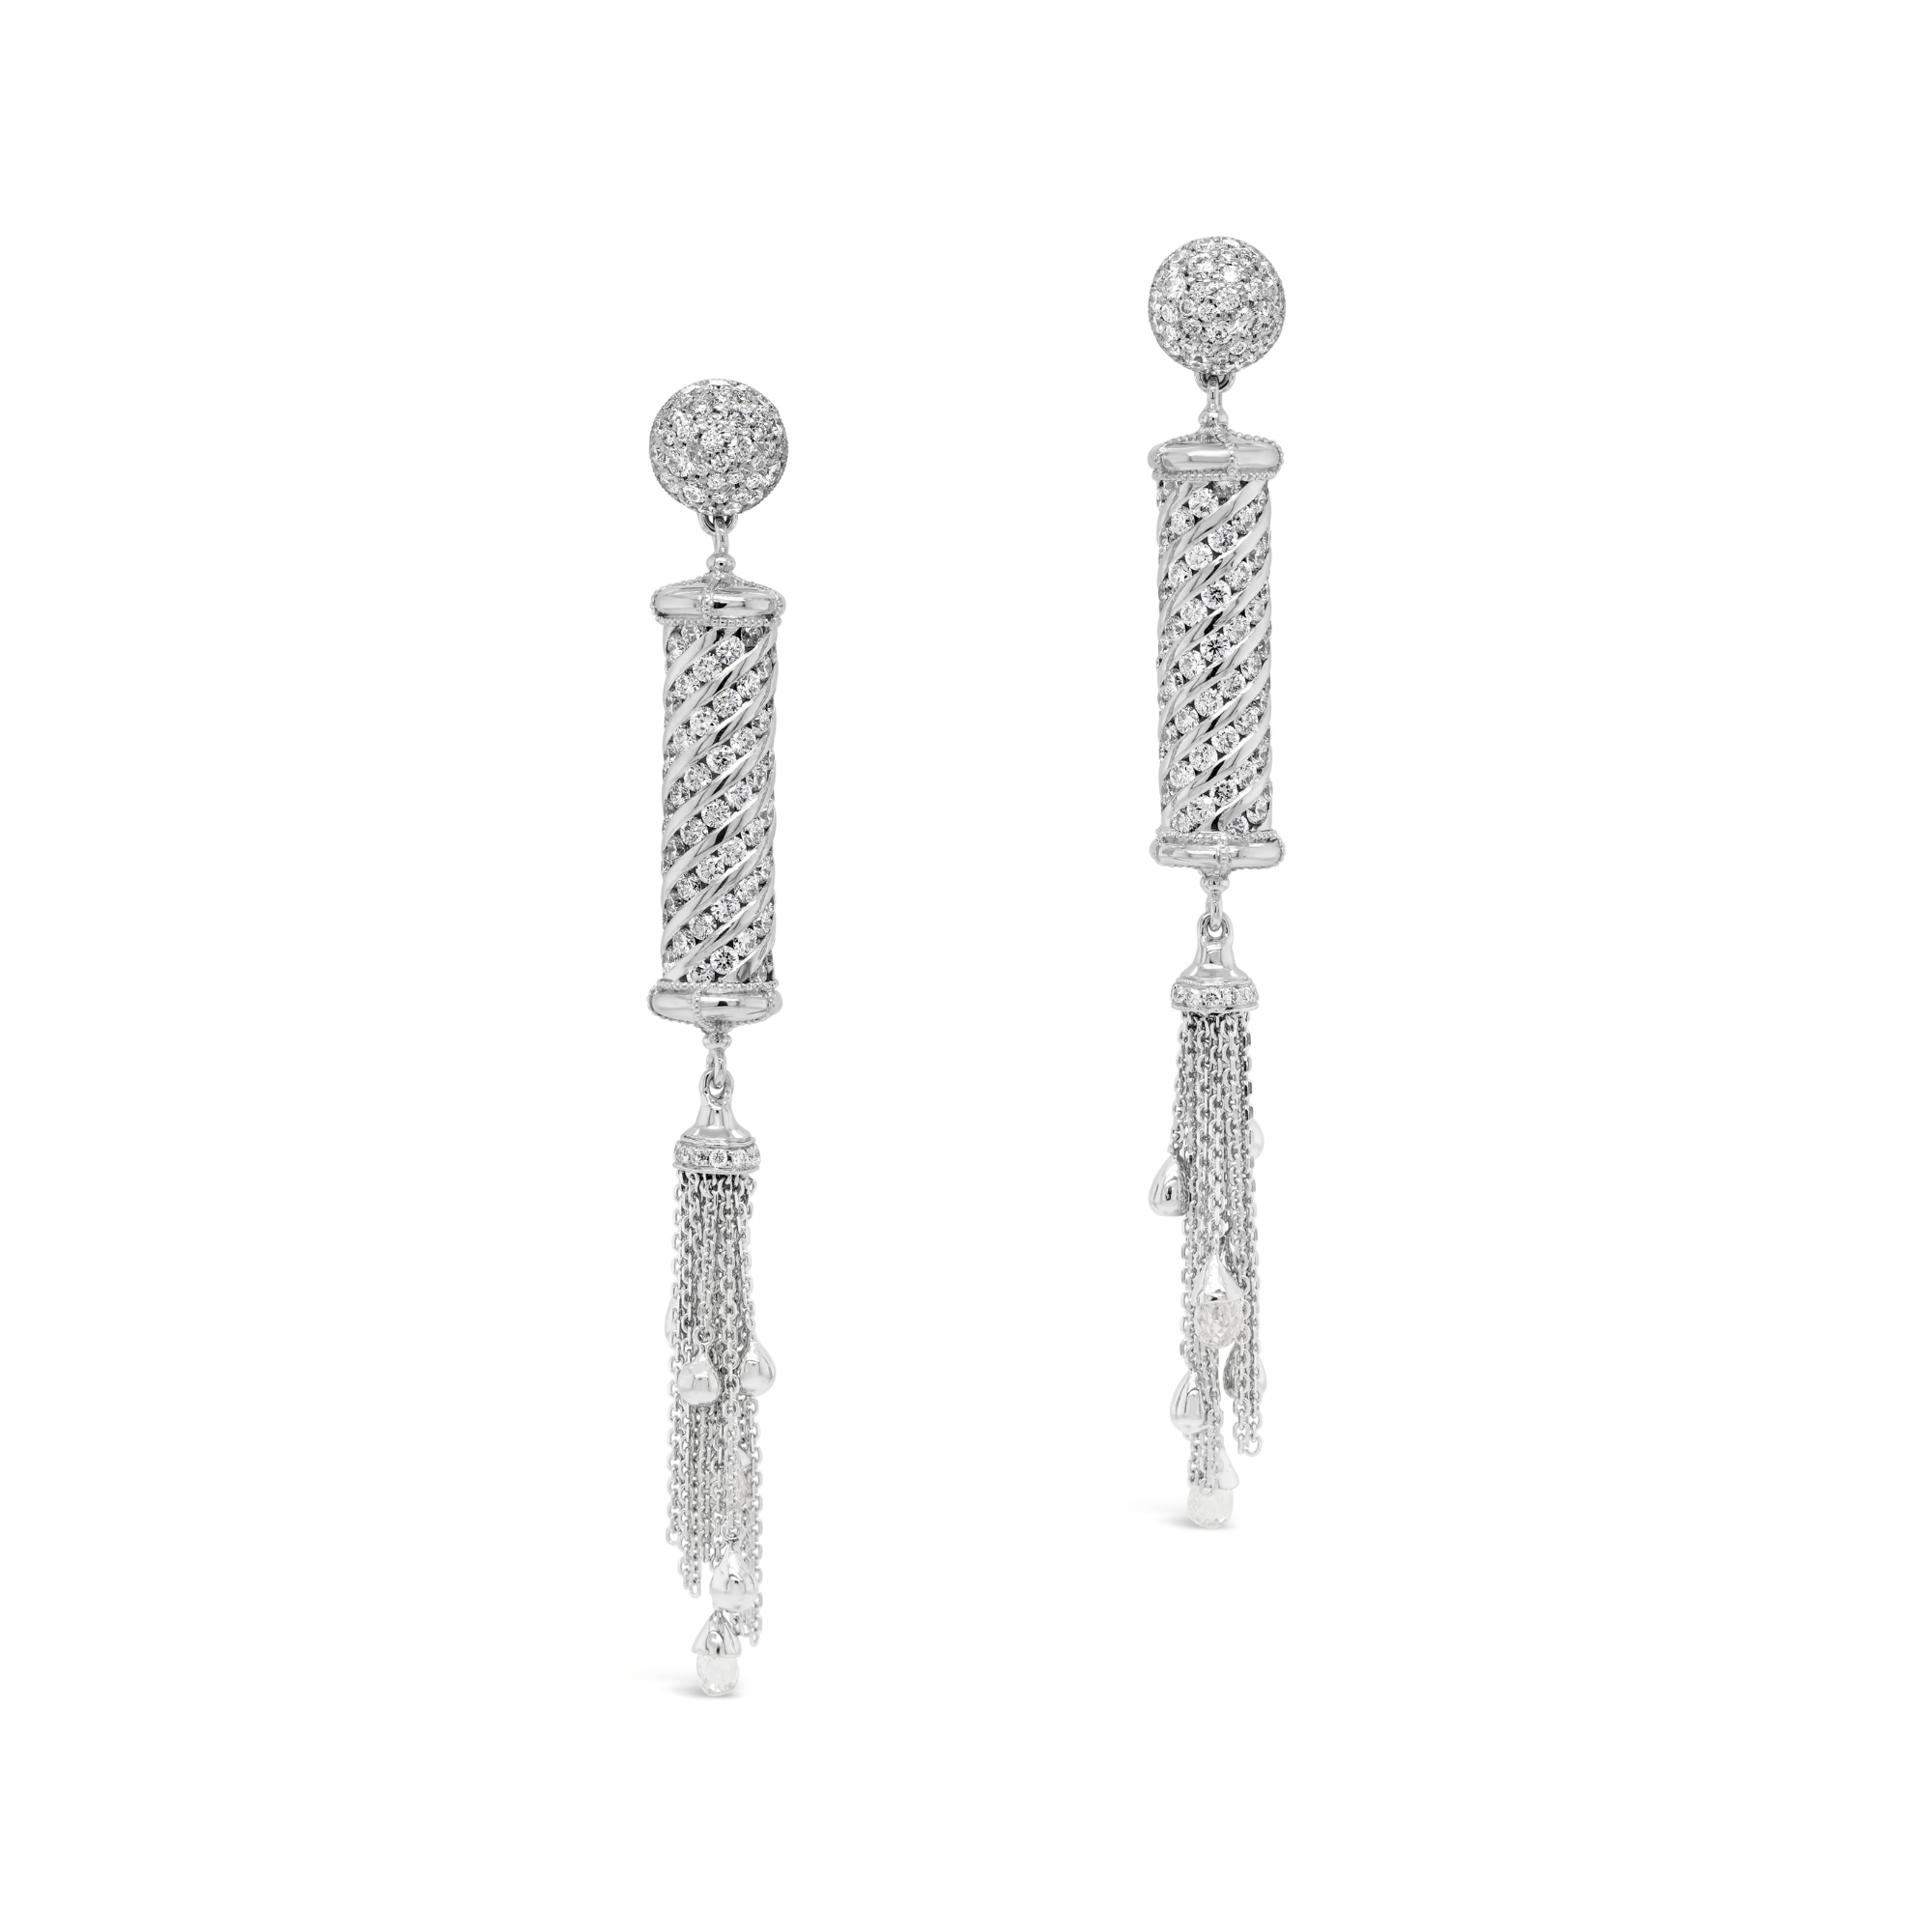 White gold and round brilliant cut diamond drop earrings